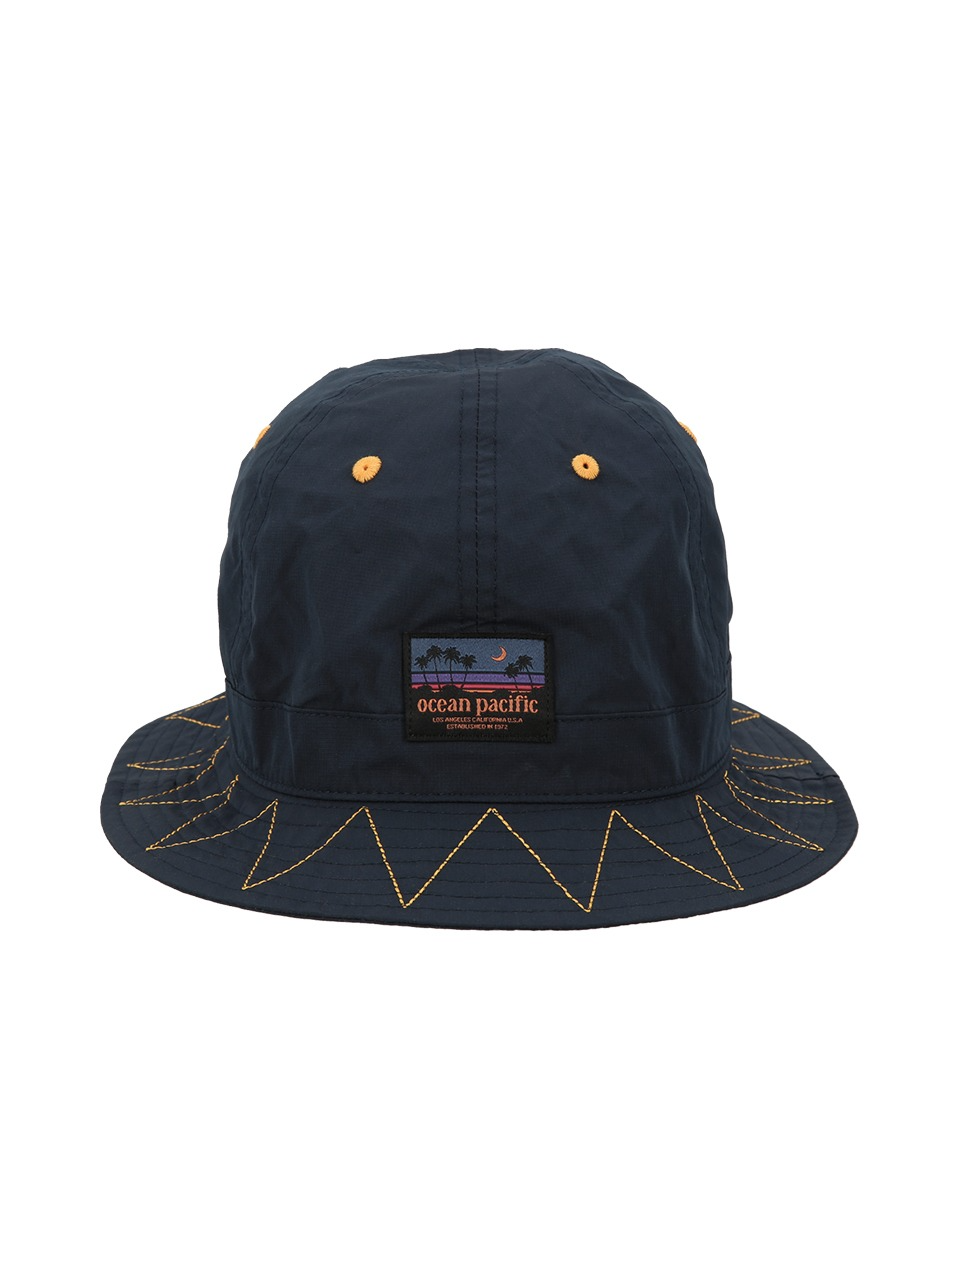 [OP]OCEAN PACIFIC STITCH BUCKETHAT [2 COLOR]